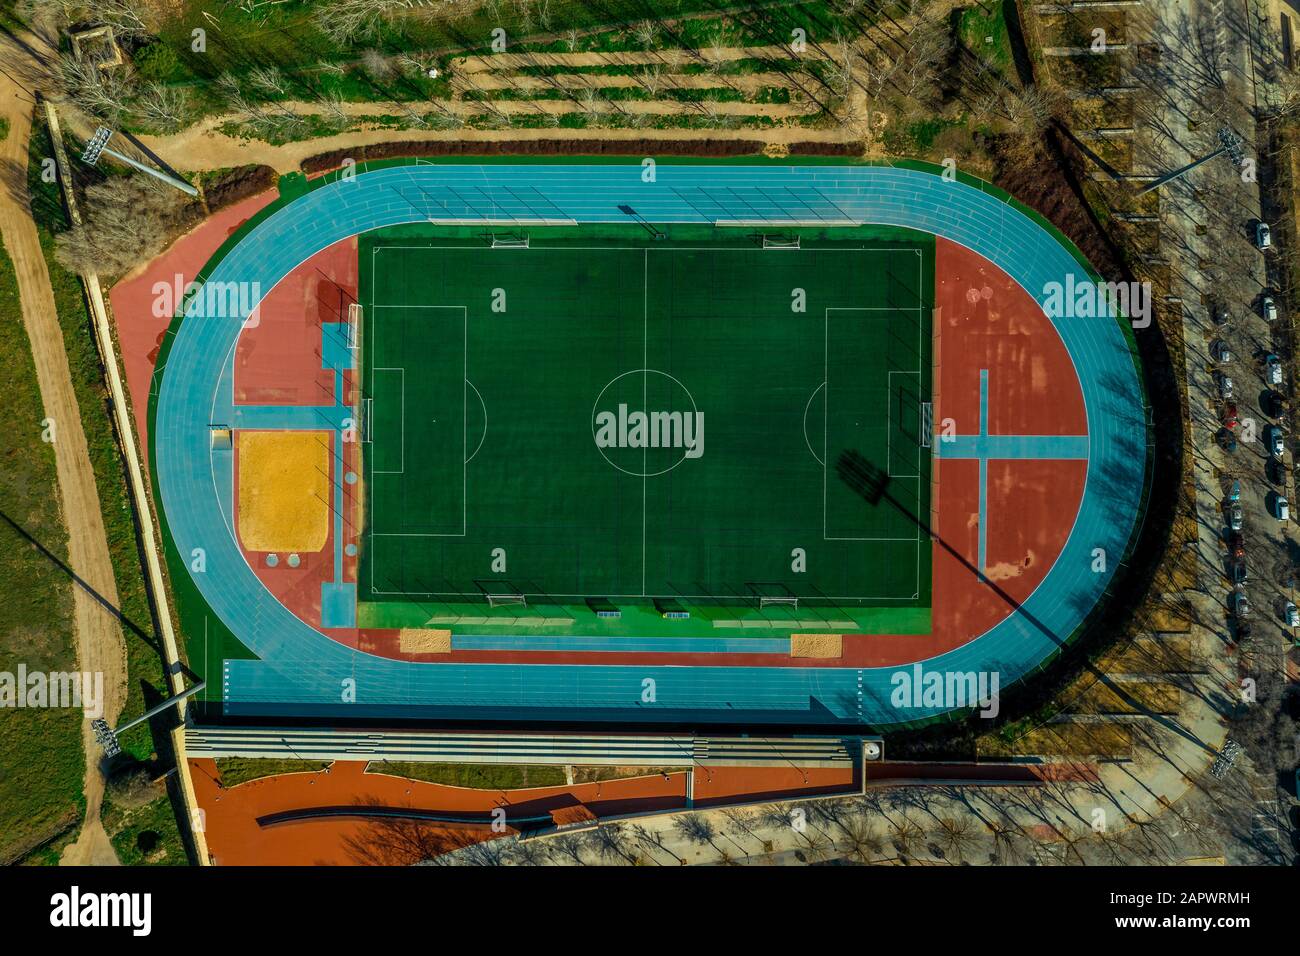 Aerial top down view of a multi sport, multi functionality sport complex with blue track and field, green soccer field and stands in Almansa Spain Stock Photo